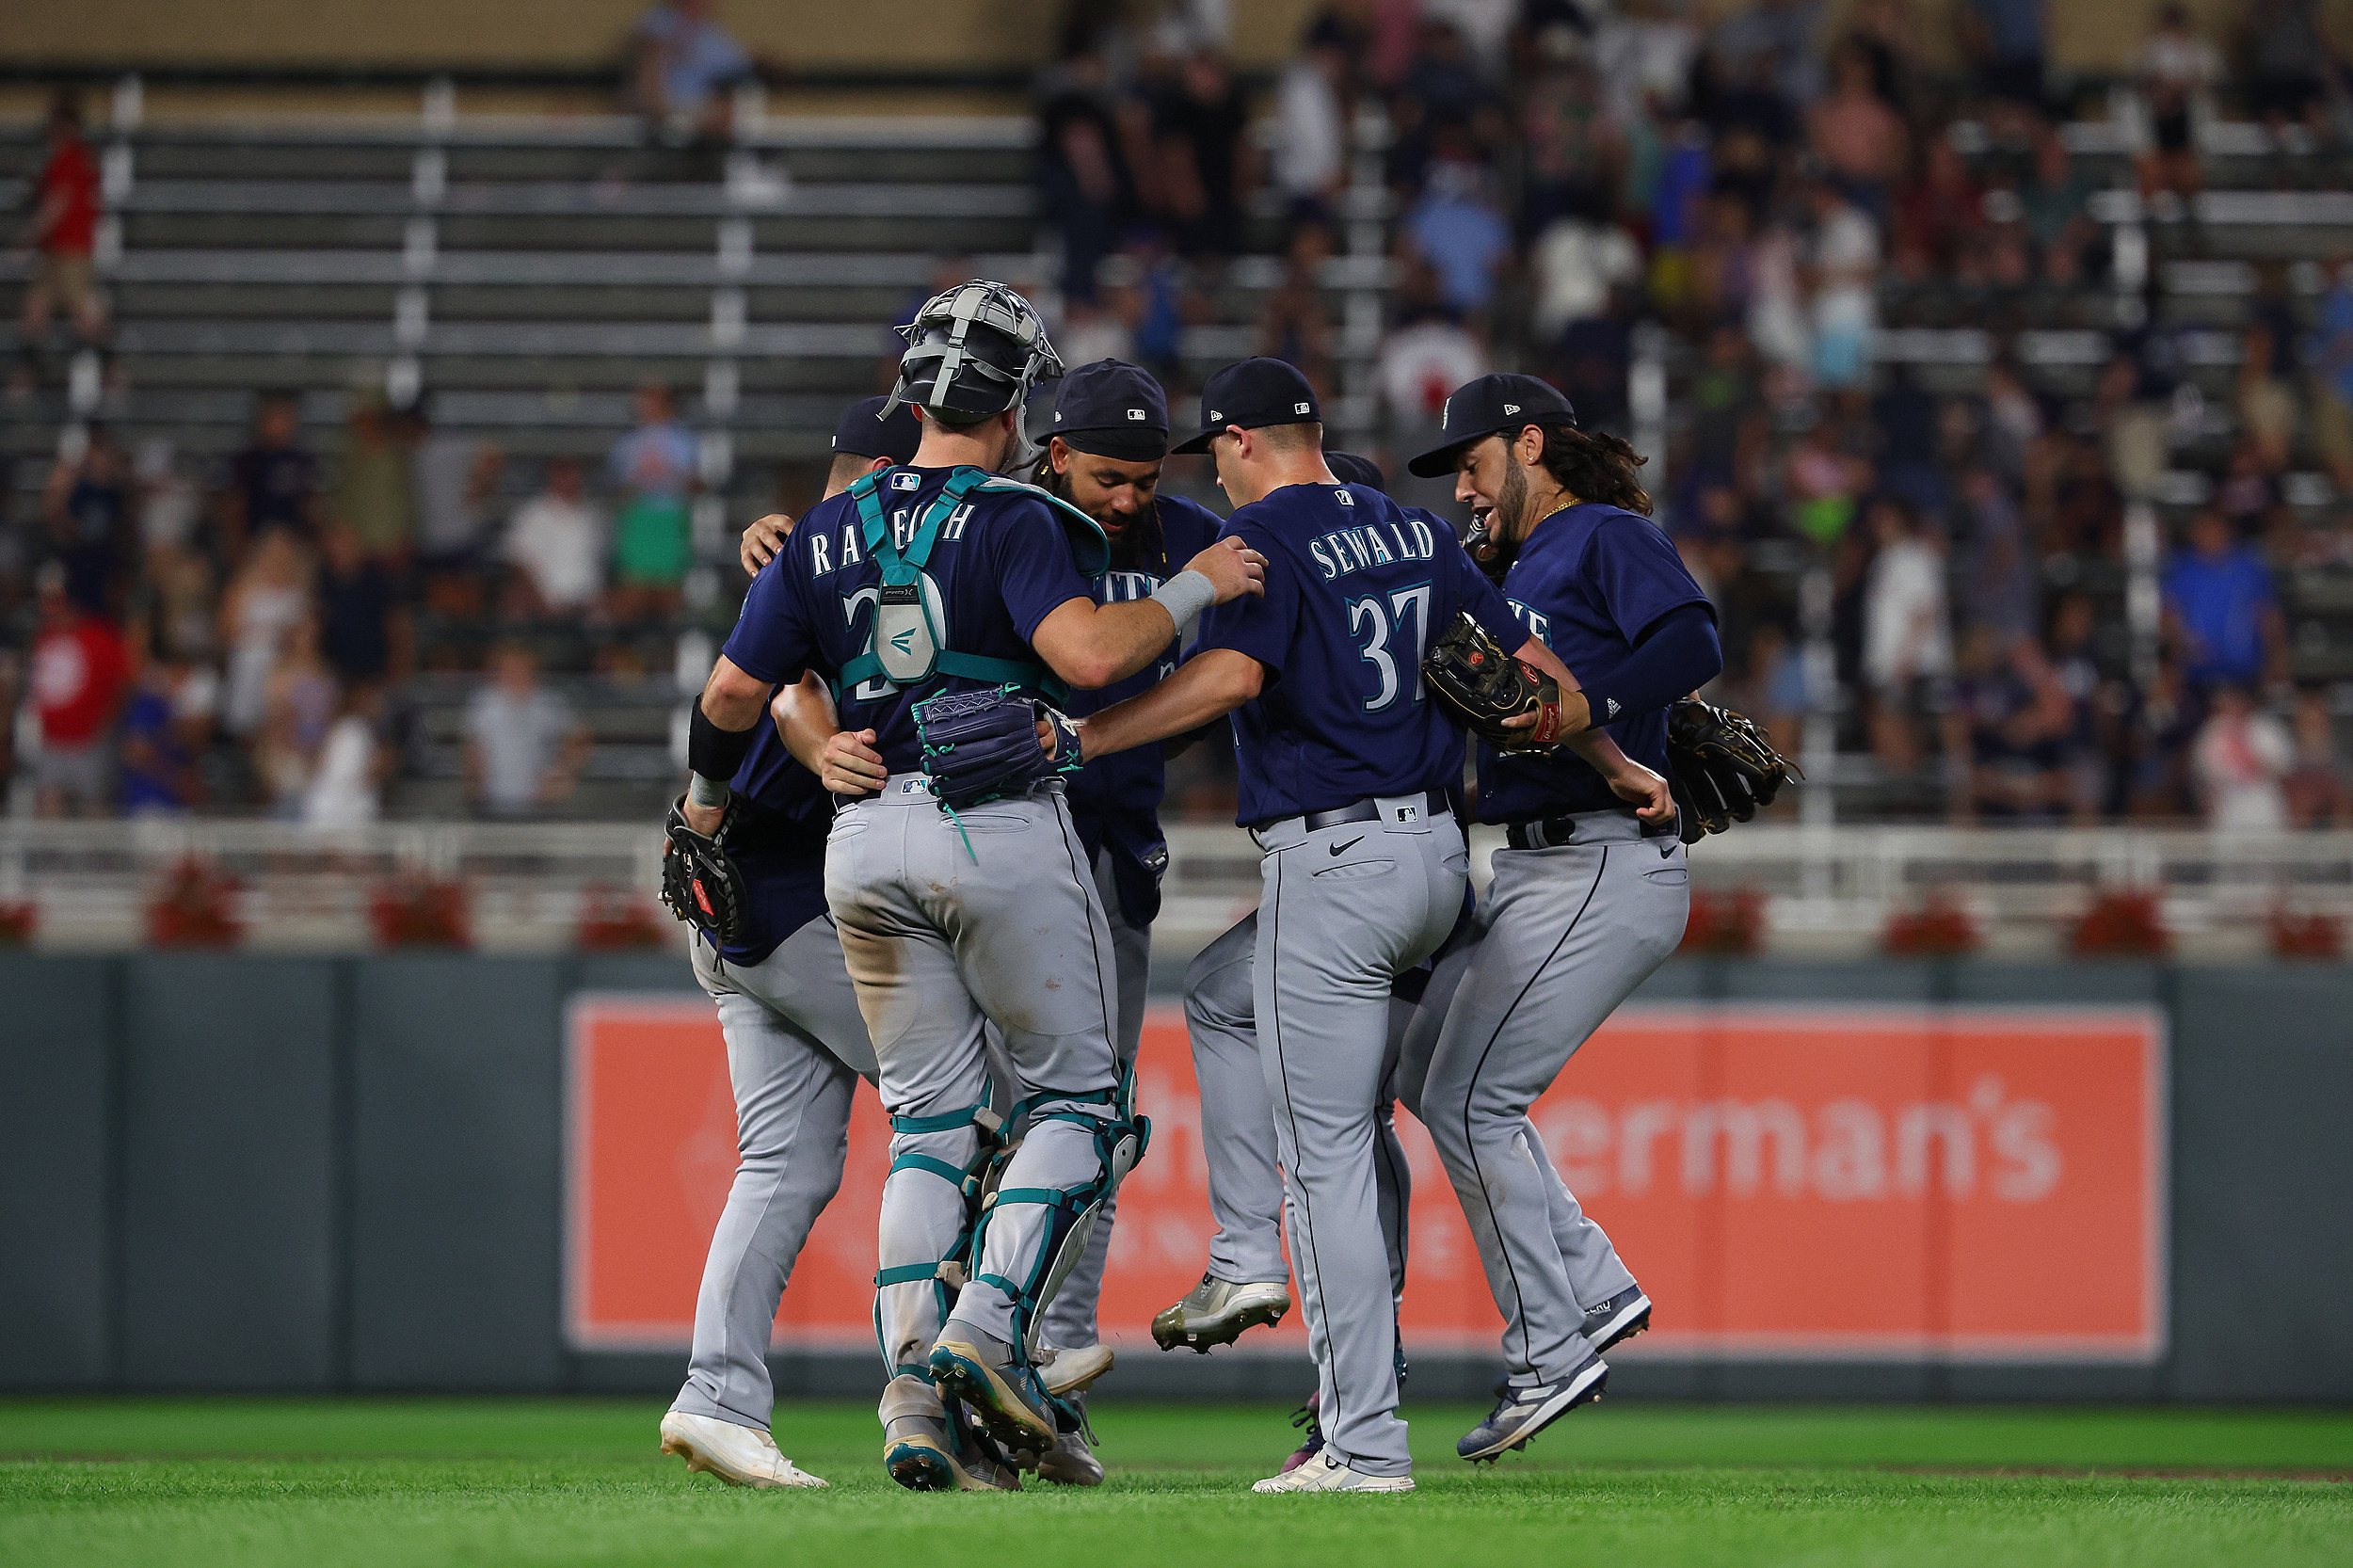 Mariners Turn Back The Clock; Celebrate Negro League Teams, by Mariners PR